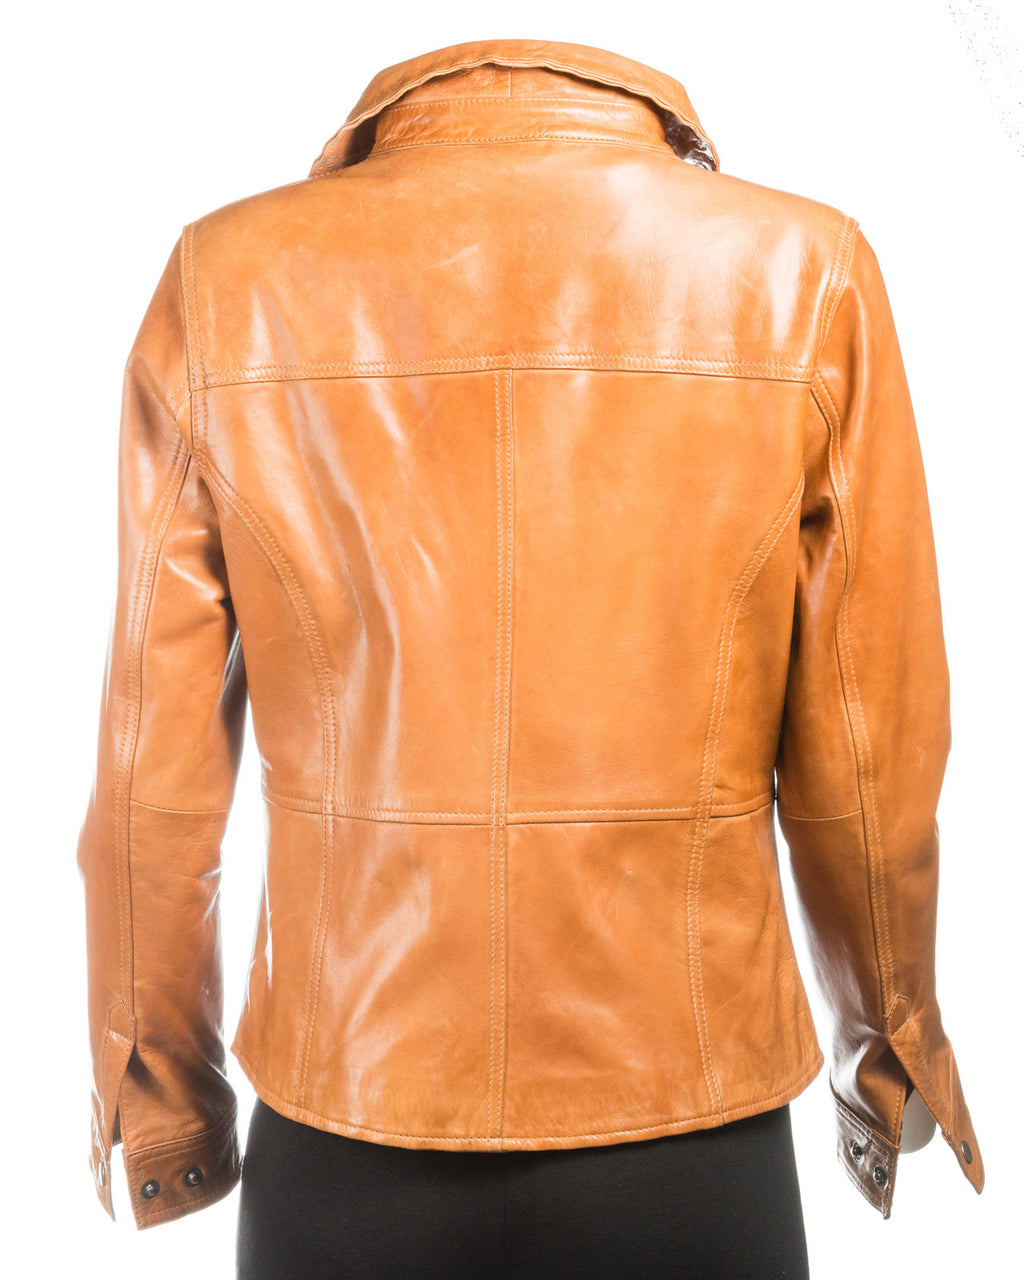 Ladies Shirt Style Leather Jacket with Press Stud Fasteners: Claudia